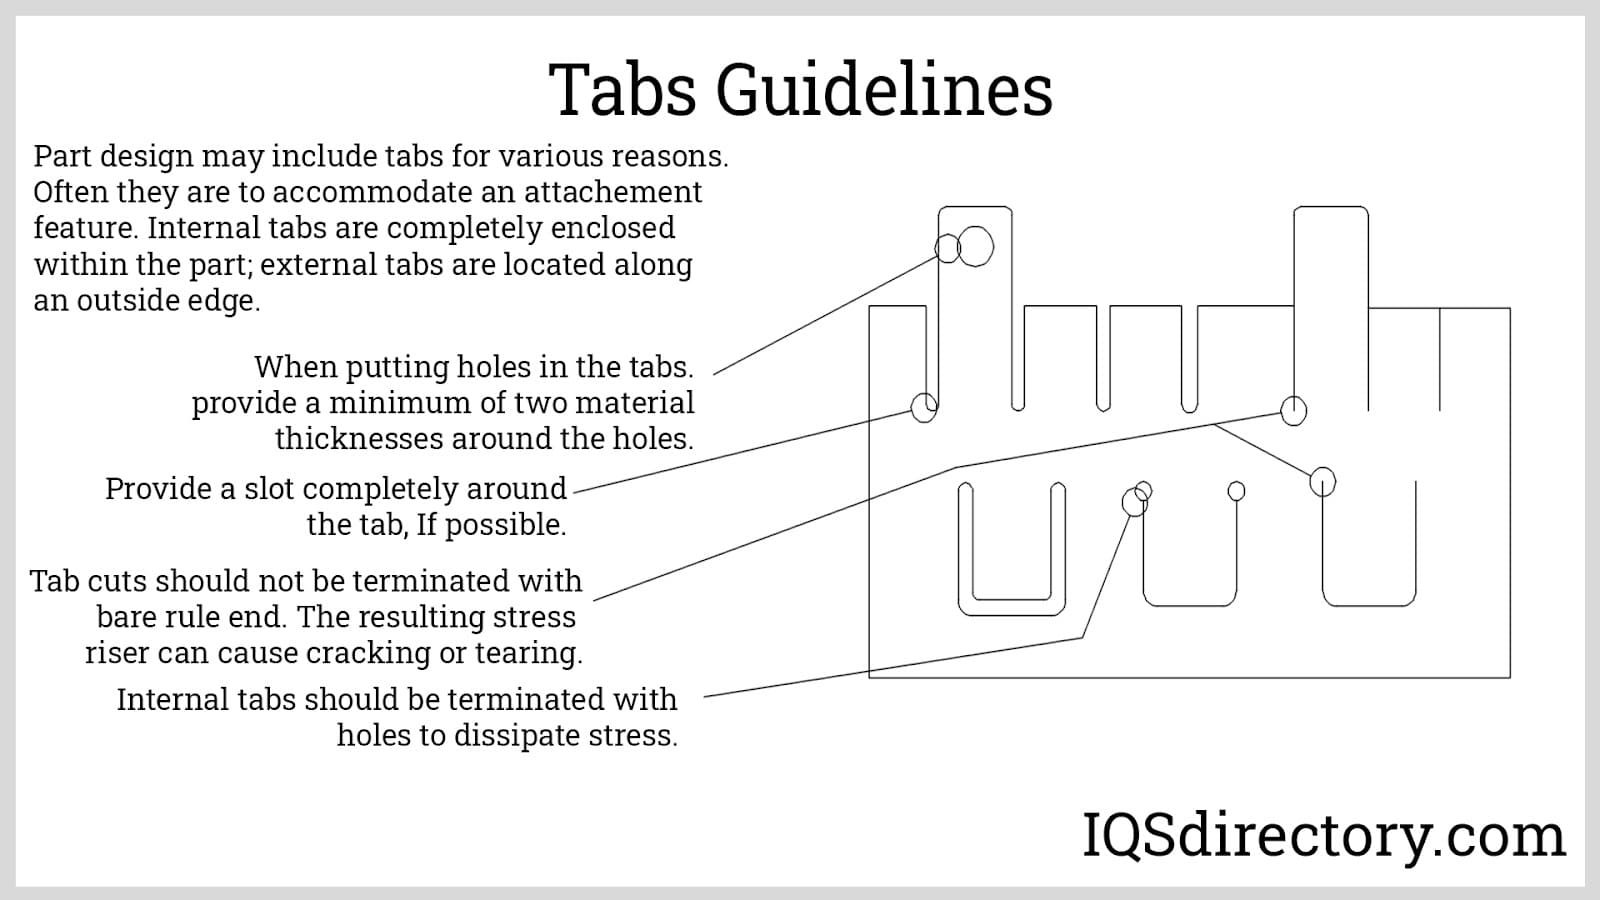 Tabs Guidelines